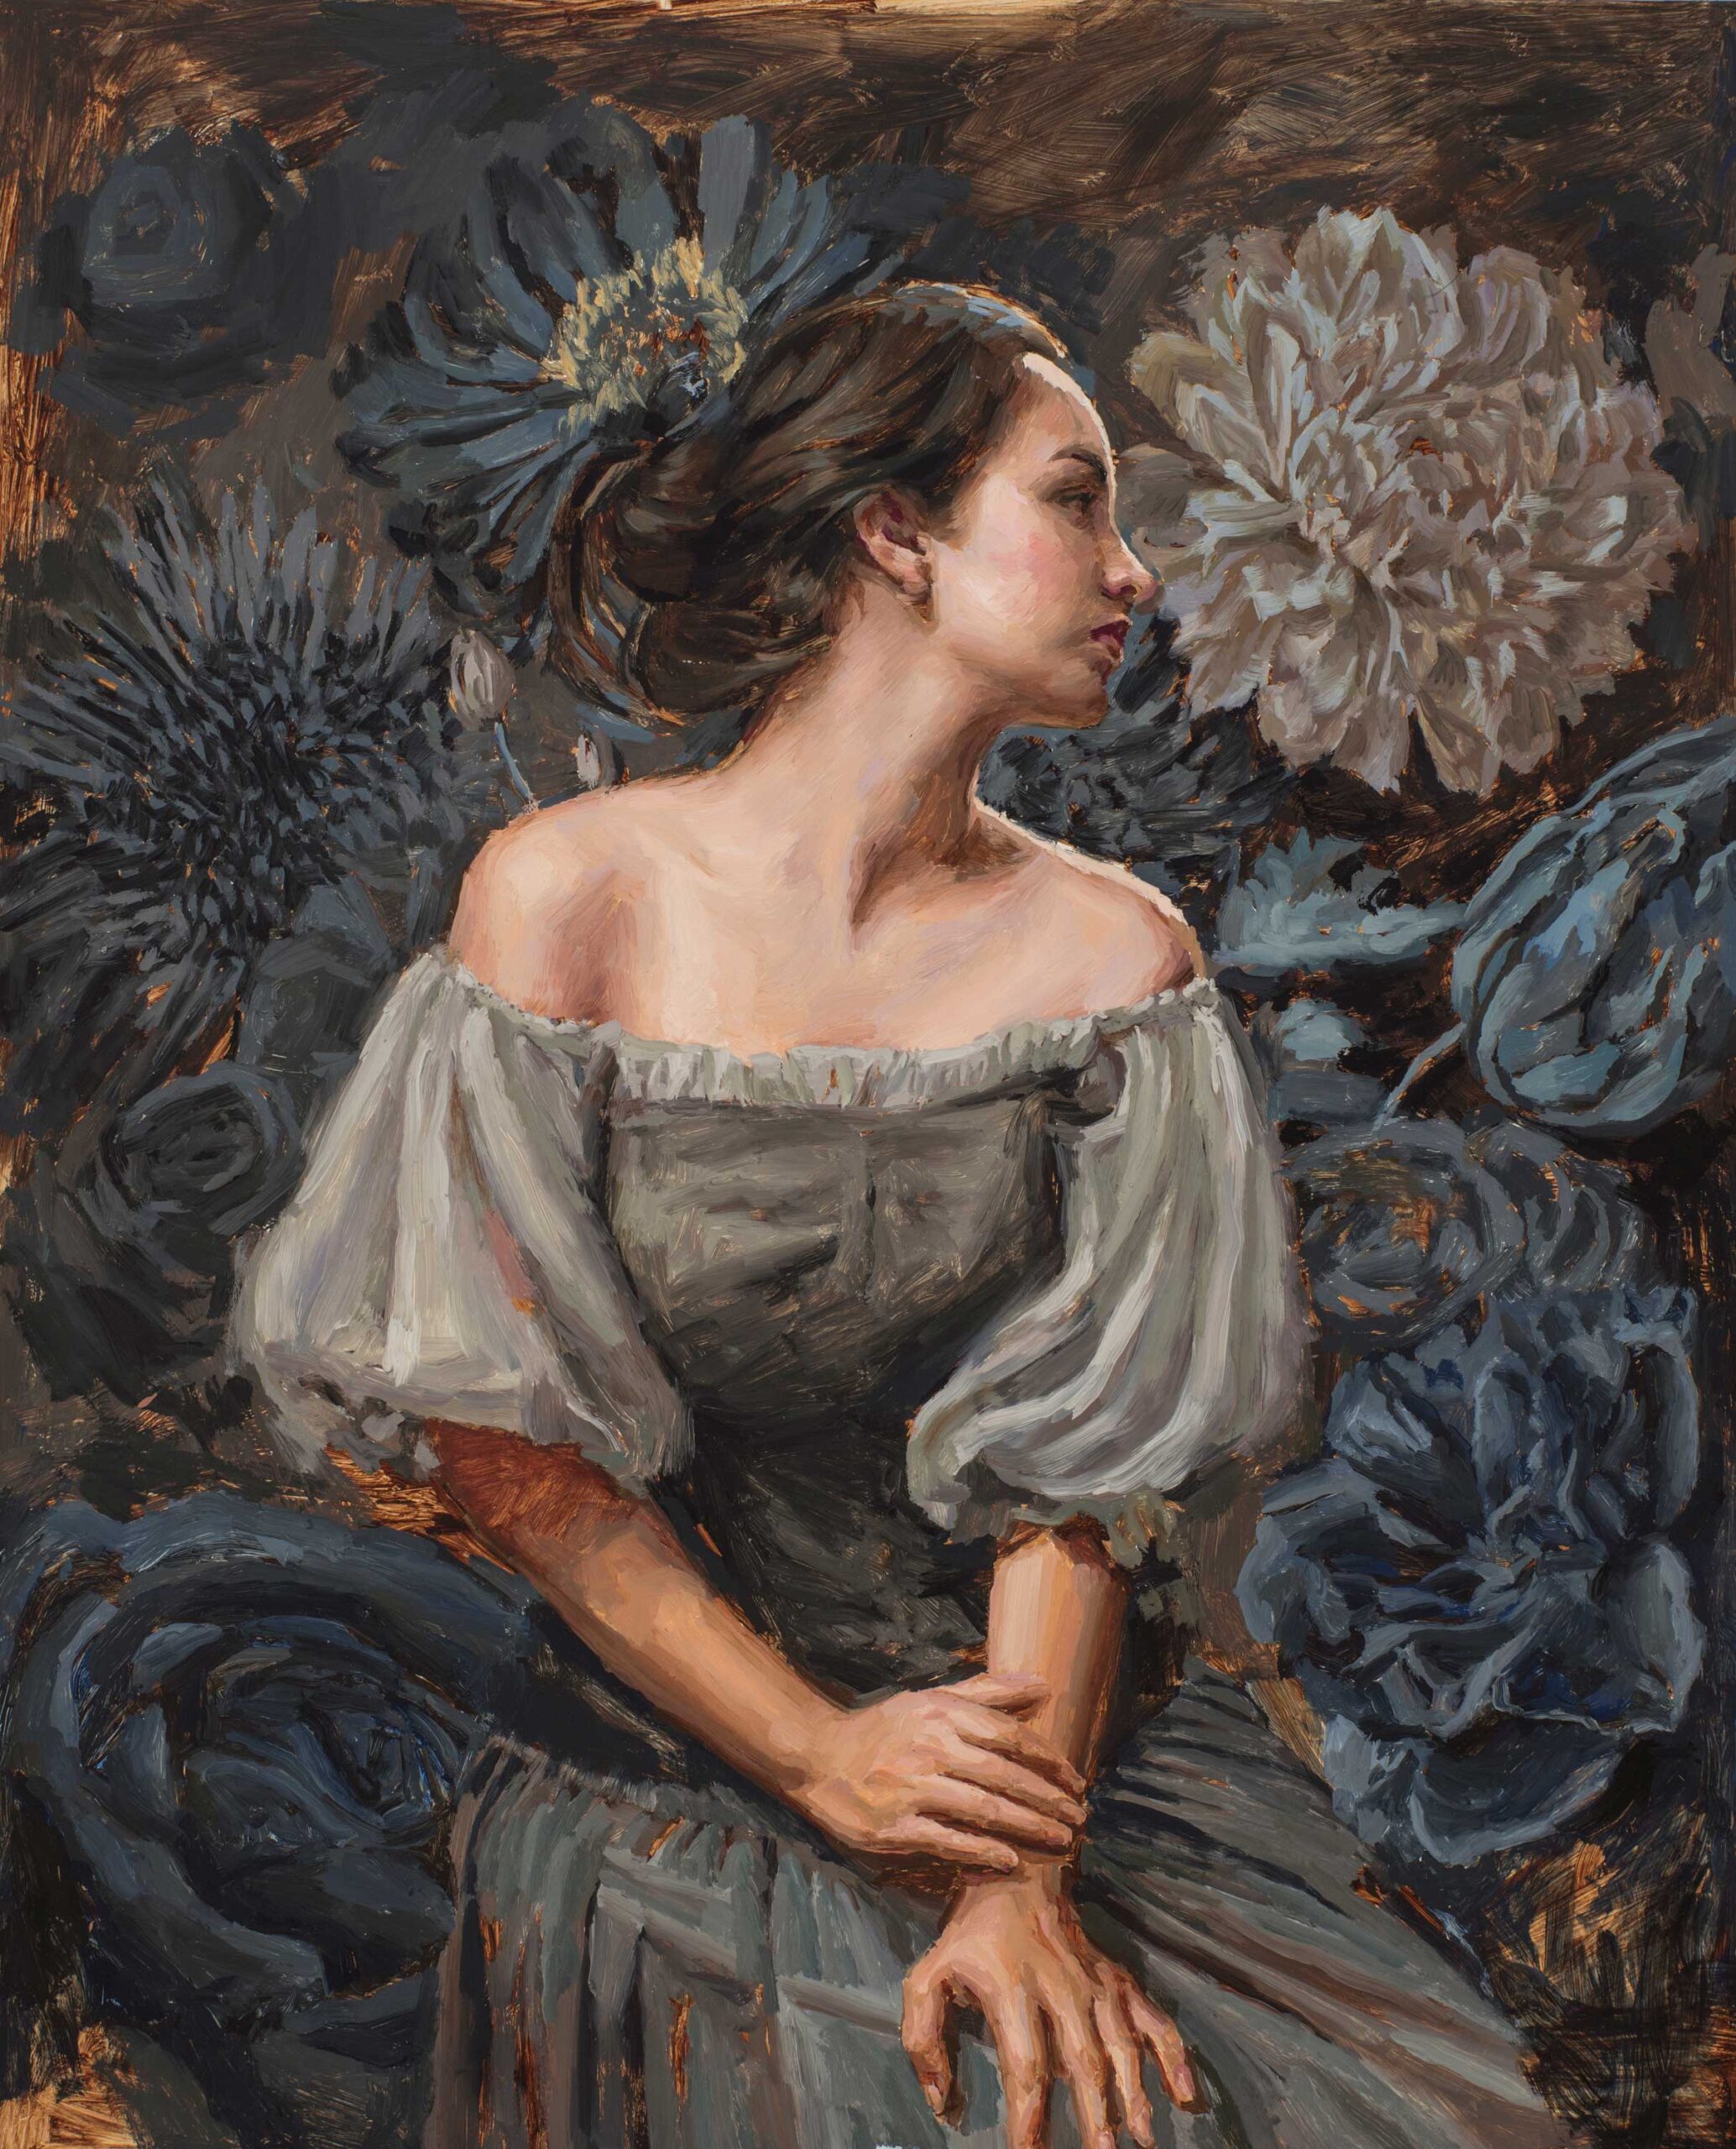 Mary Sauer, "Awake Forever in a Sweet Unrest," 20 x 16 inches, Oil on Panel, 2023